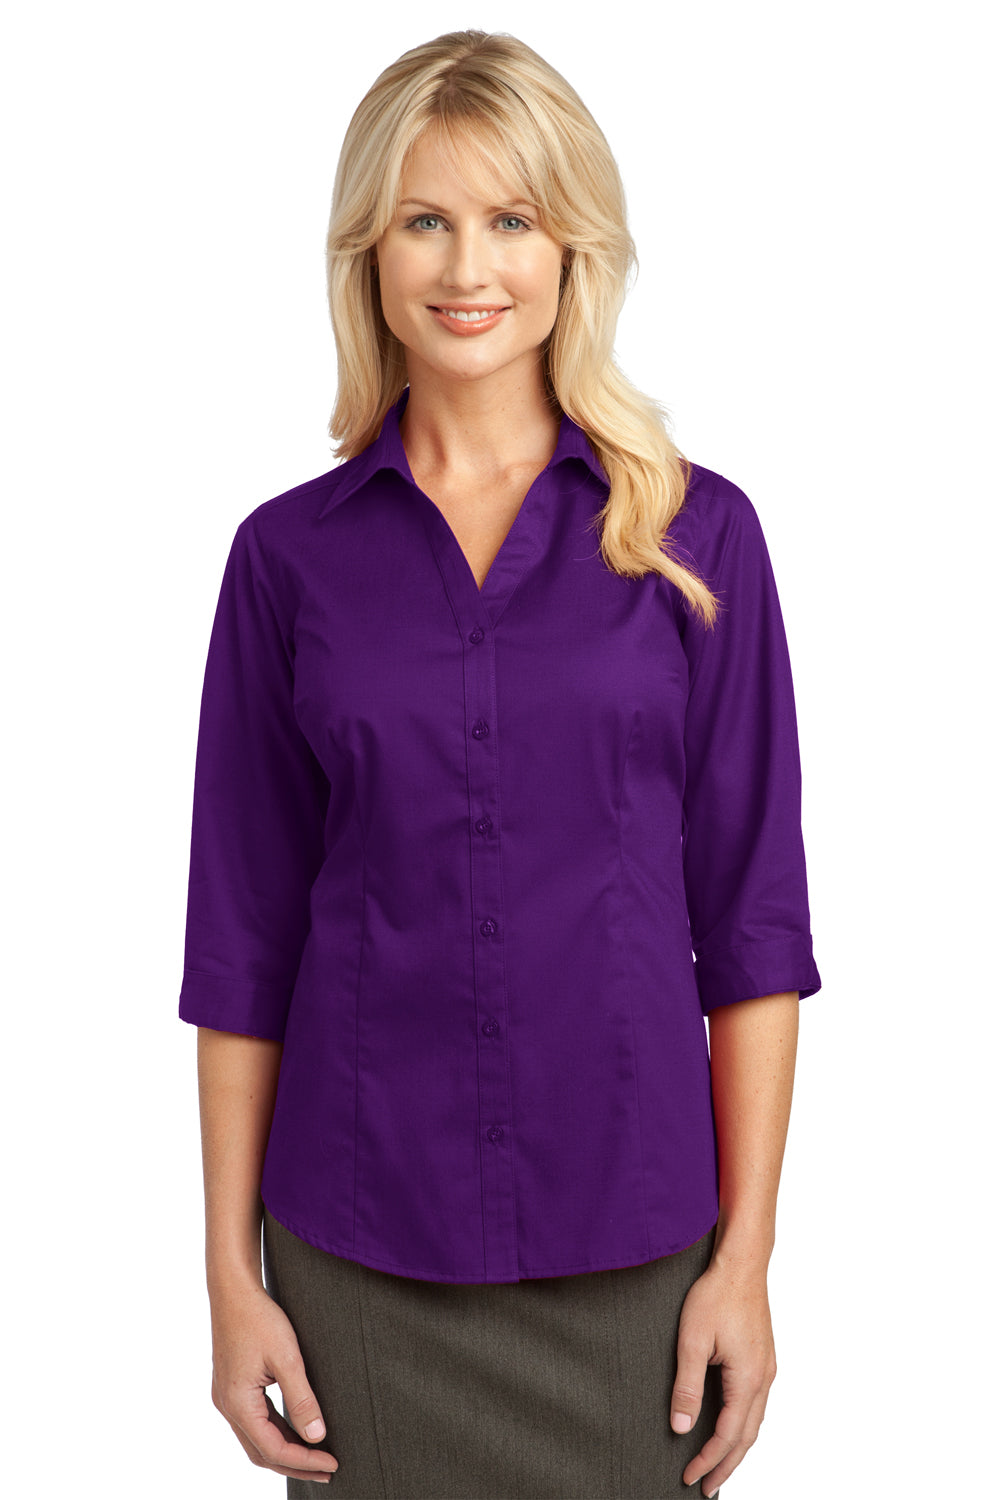 Port Authority L6290 Womens Wrinkle Resistant 3/4 Sleeve Button Down Shirt Purple Front